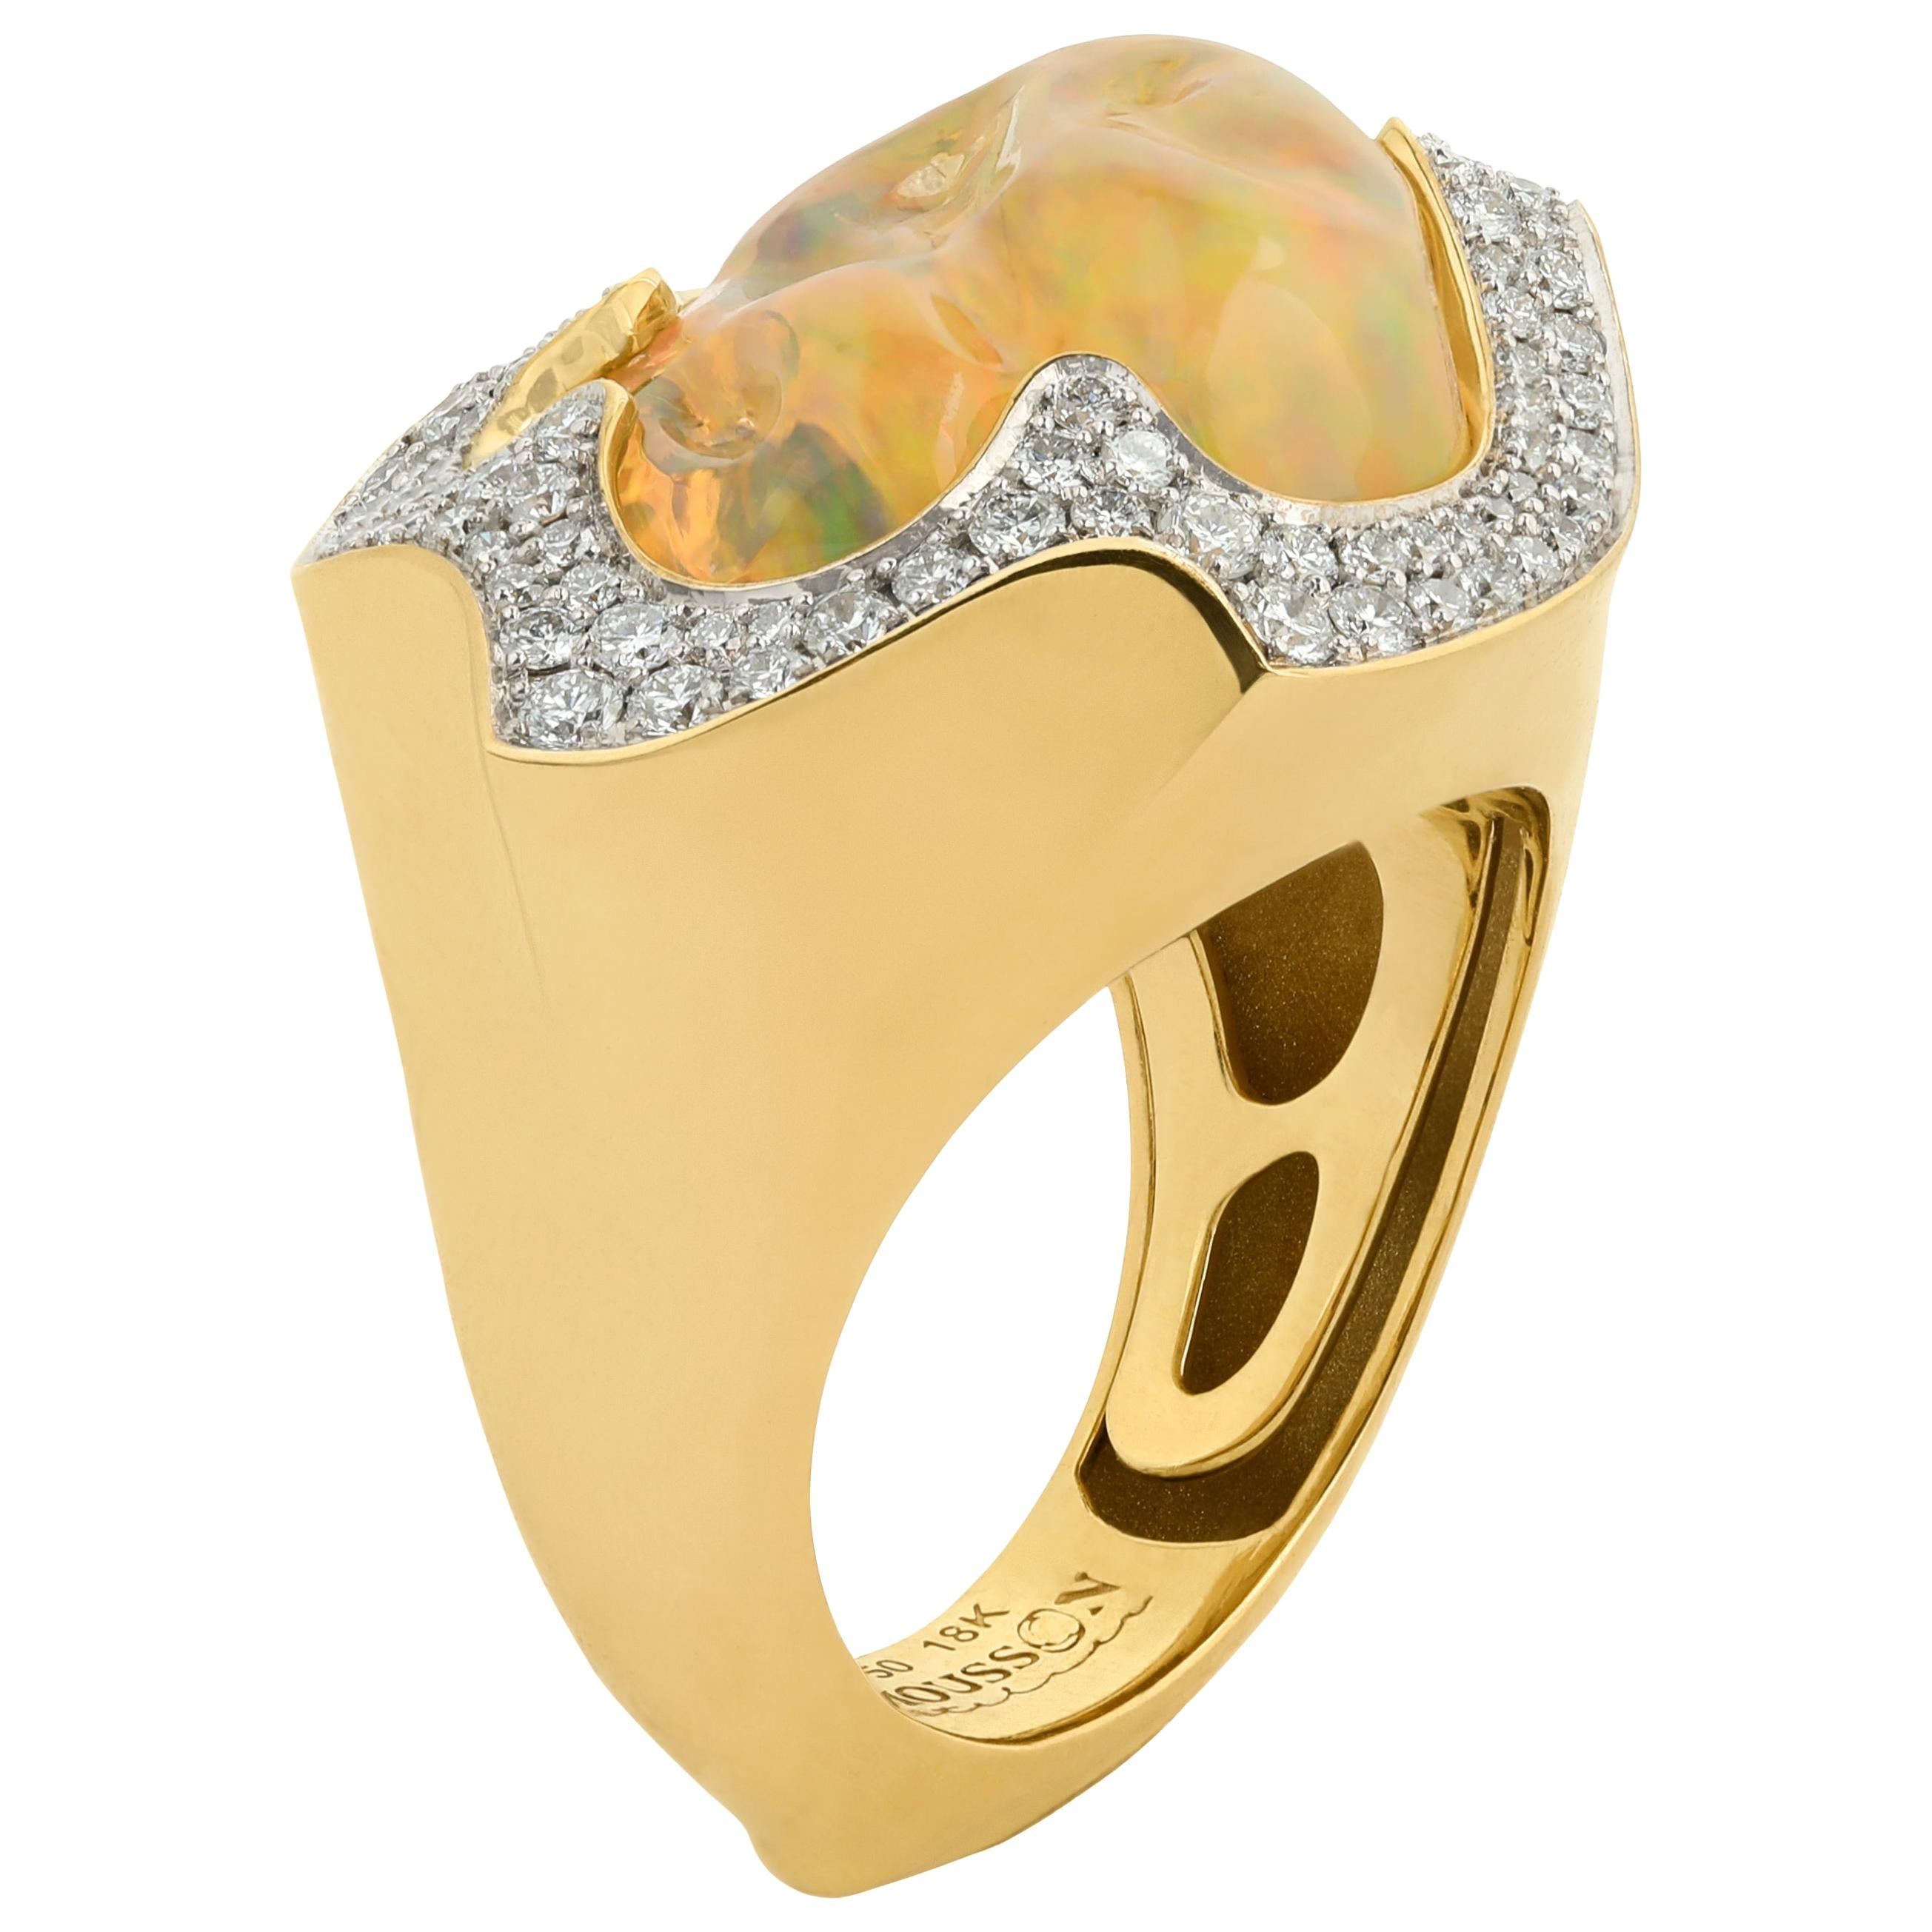 Mexican Opal 10.6 Carat Diamonds One of a Kind 18 Karat Yellow Gold Ring